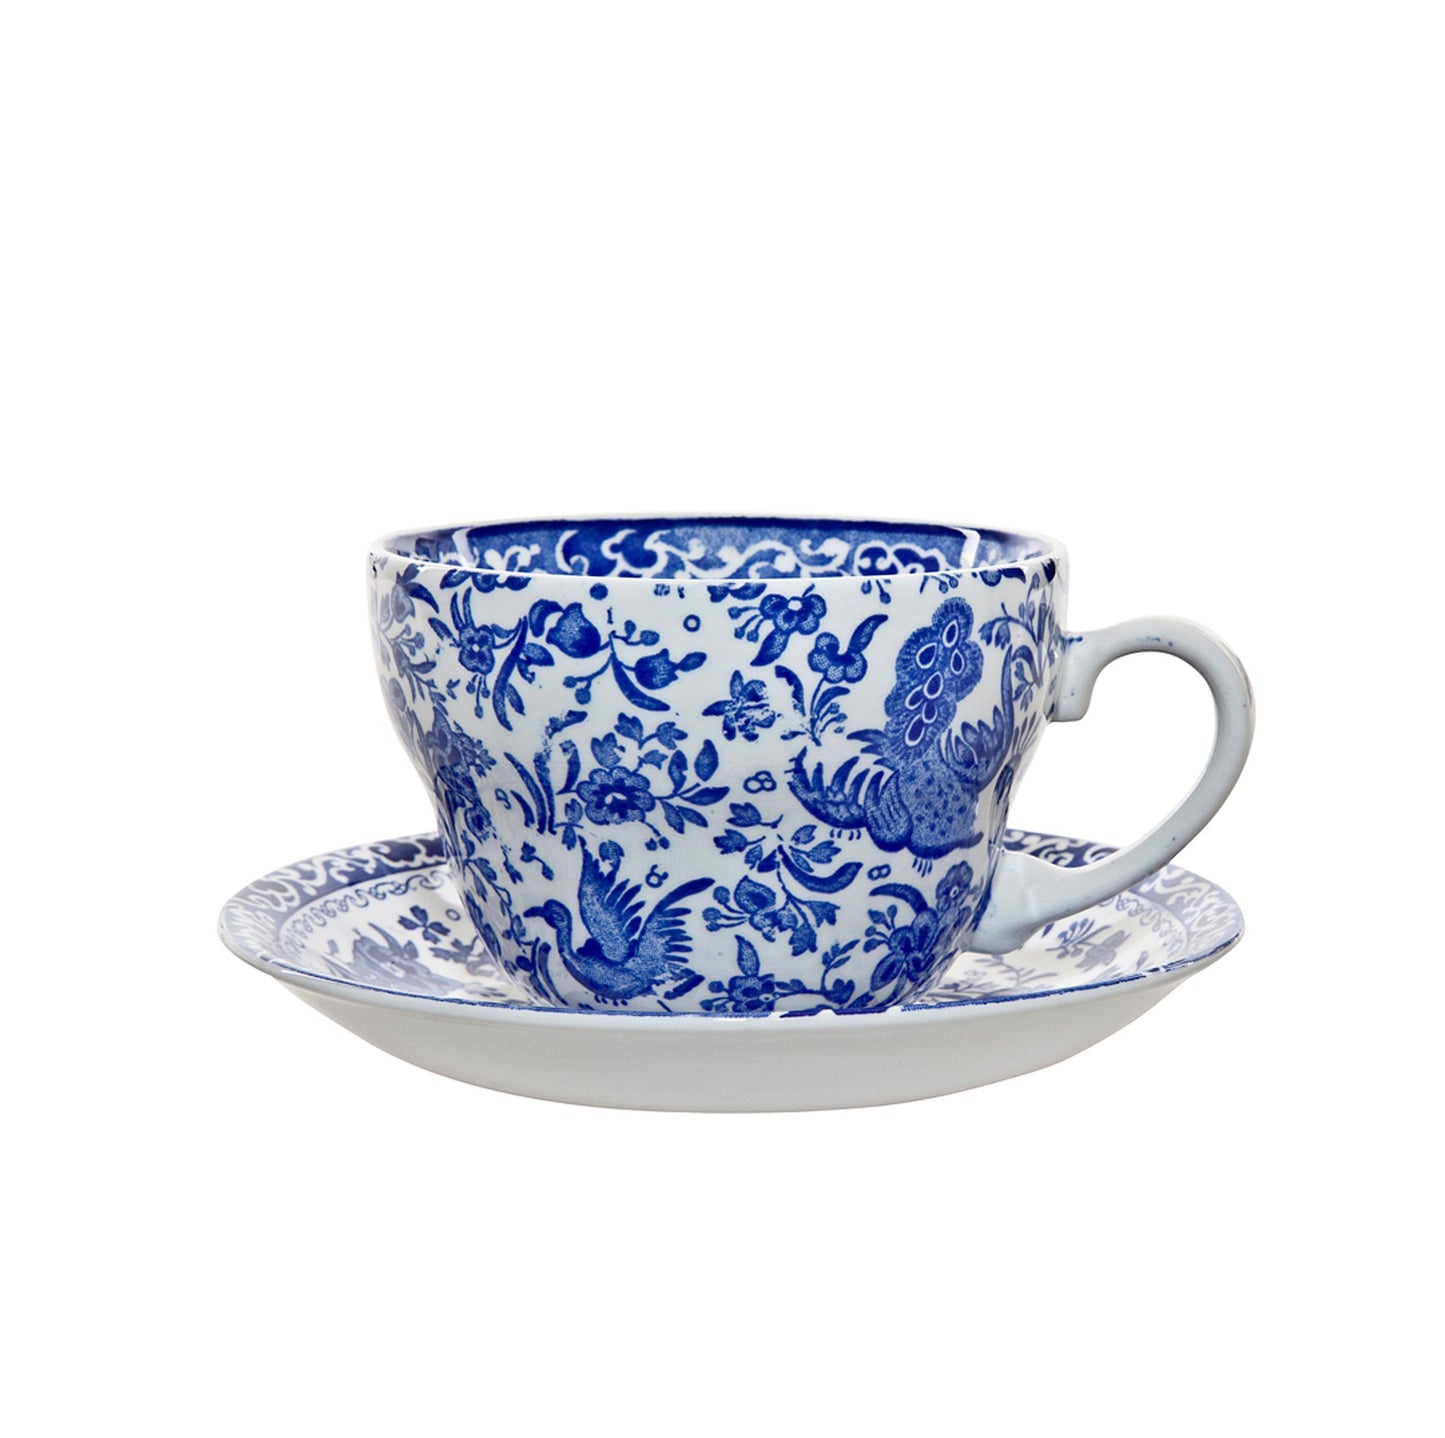 Blue Regal Peacock Breakfast Cup And Saucer